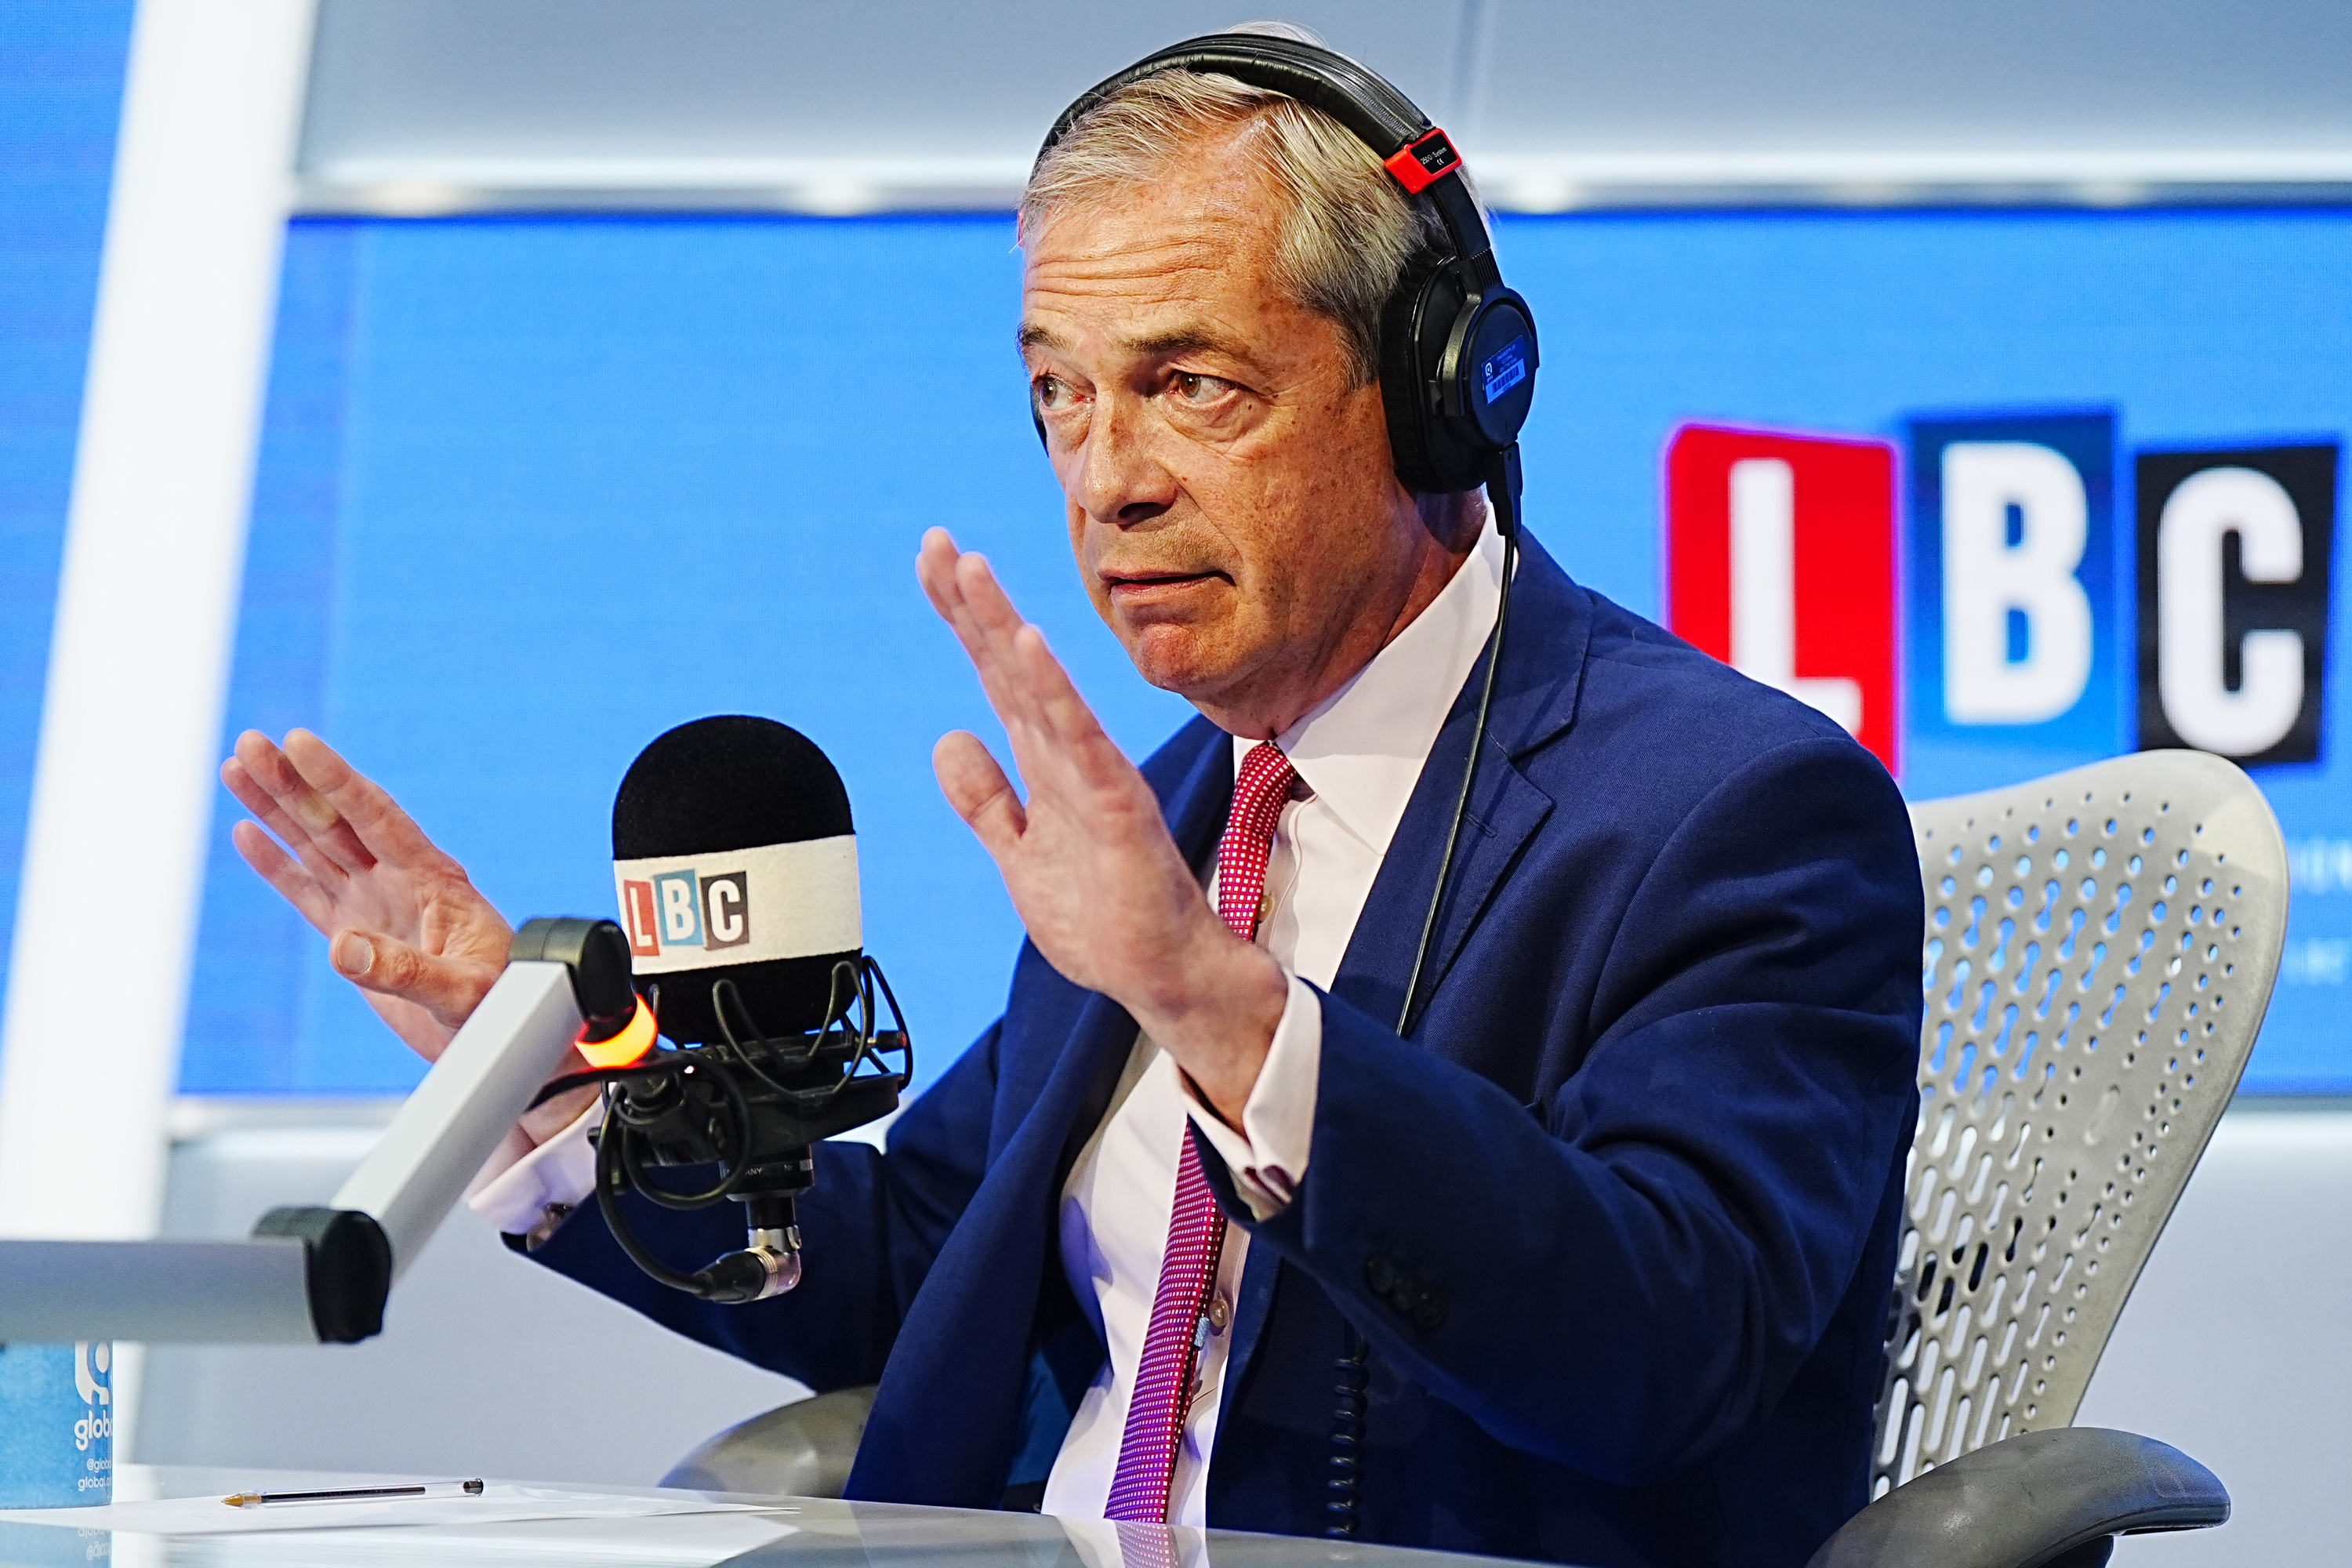 Farage defends Reform candidates who are ‘friends’ with fascist